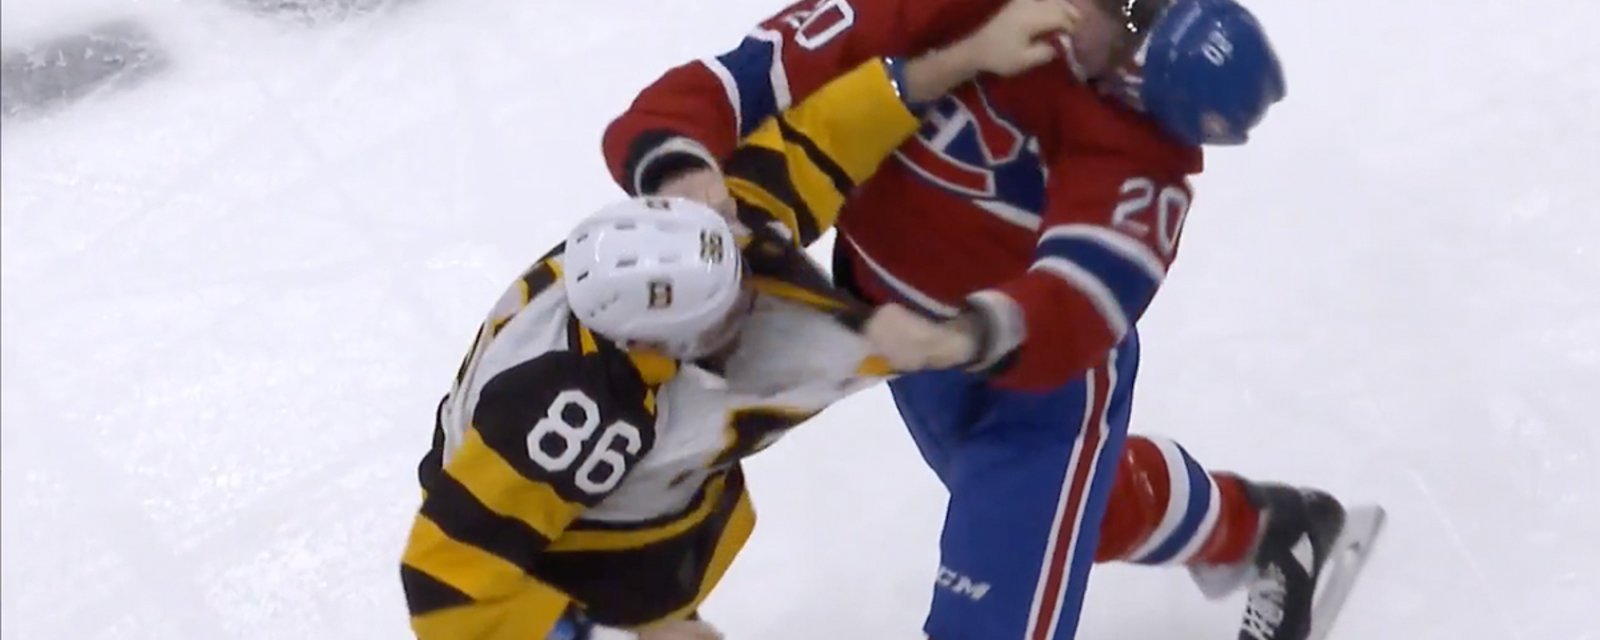 Miller and Deslauriers go at it in great heavyweight scrap